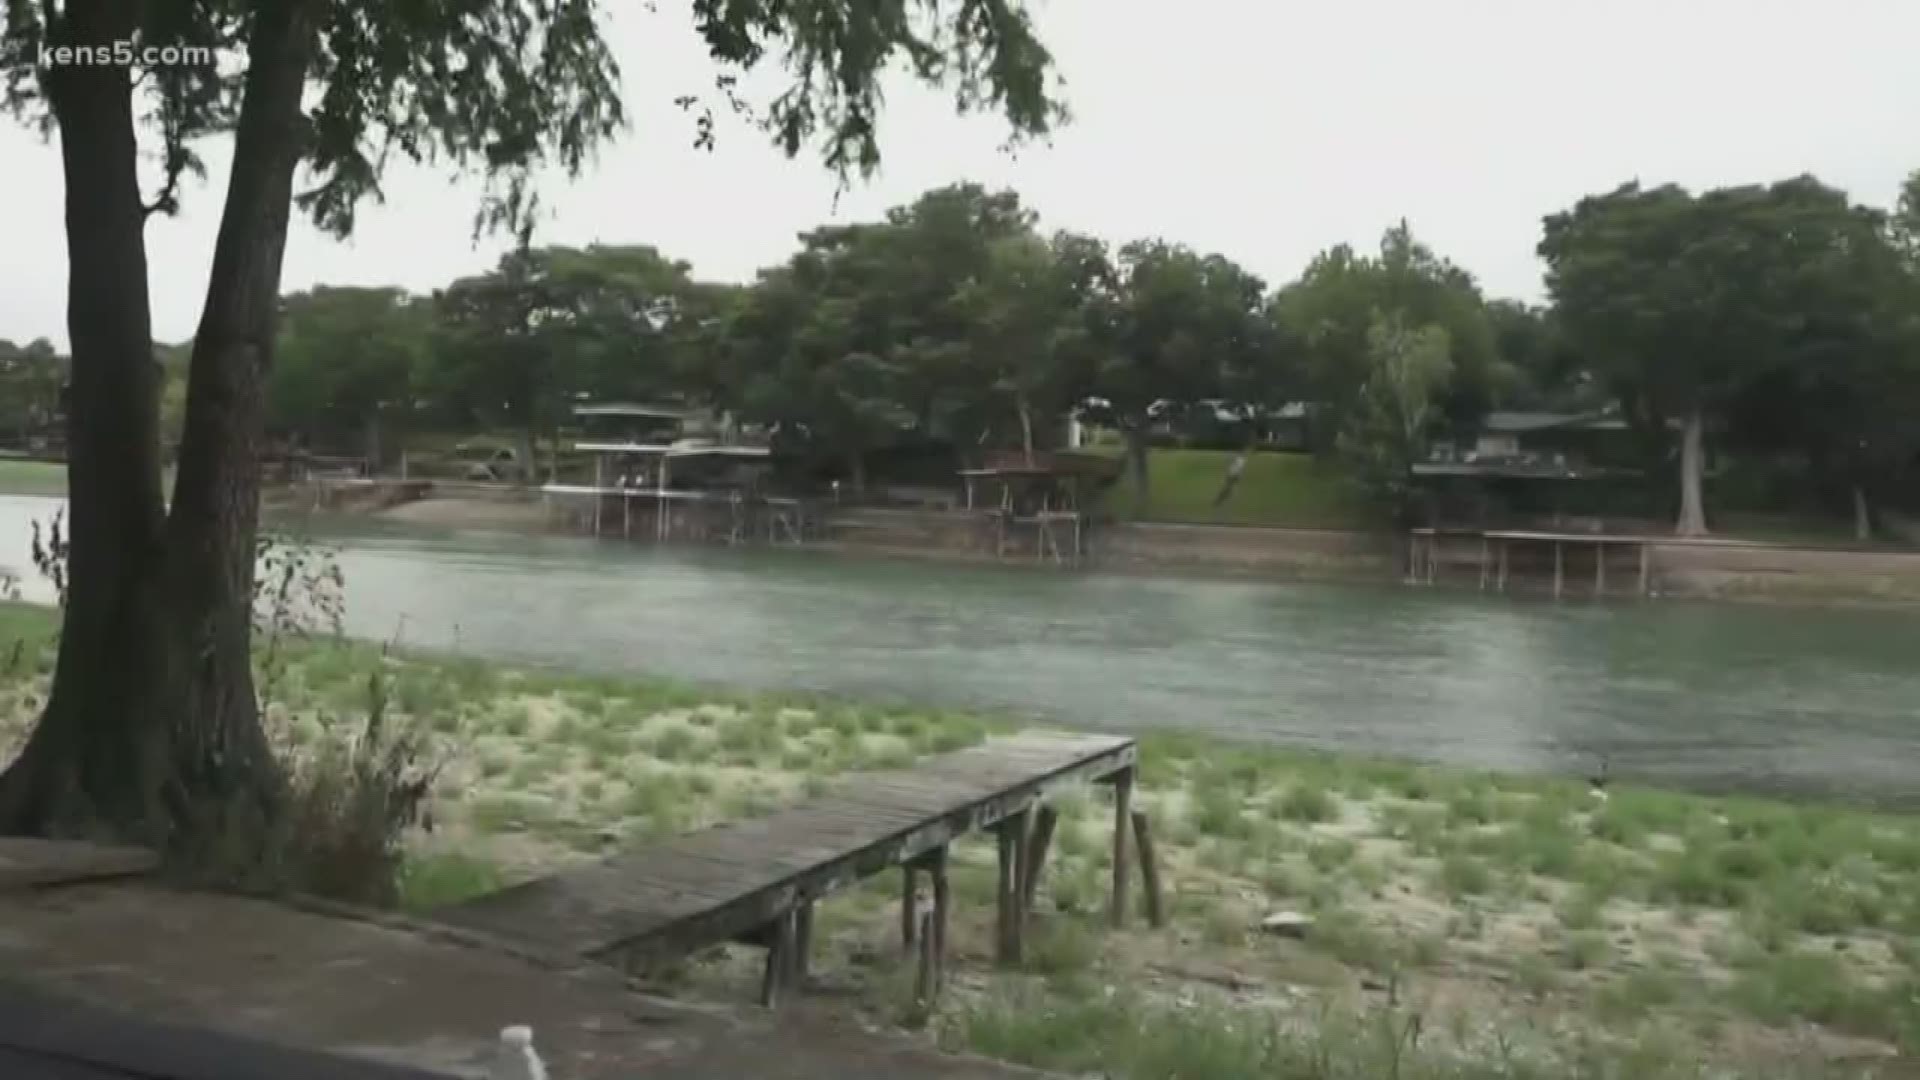 A dam failure on Lake Dunlap along the Guadalupe River is causing a major headache for homeowners up and down the lake for miles. Homeowners and the Guadalupe-Blanco River Association are trying to figure out how to fix or replace the dam.